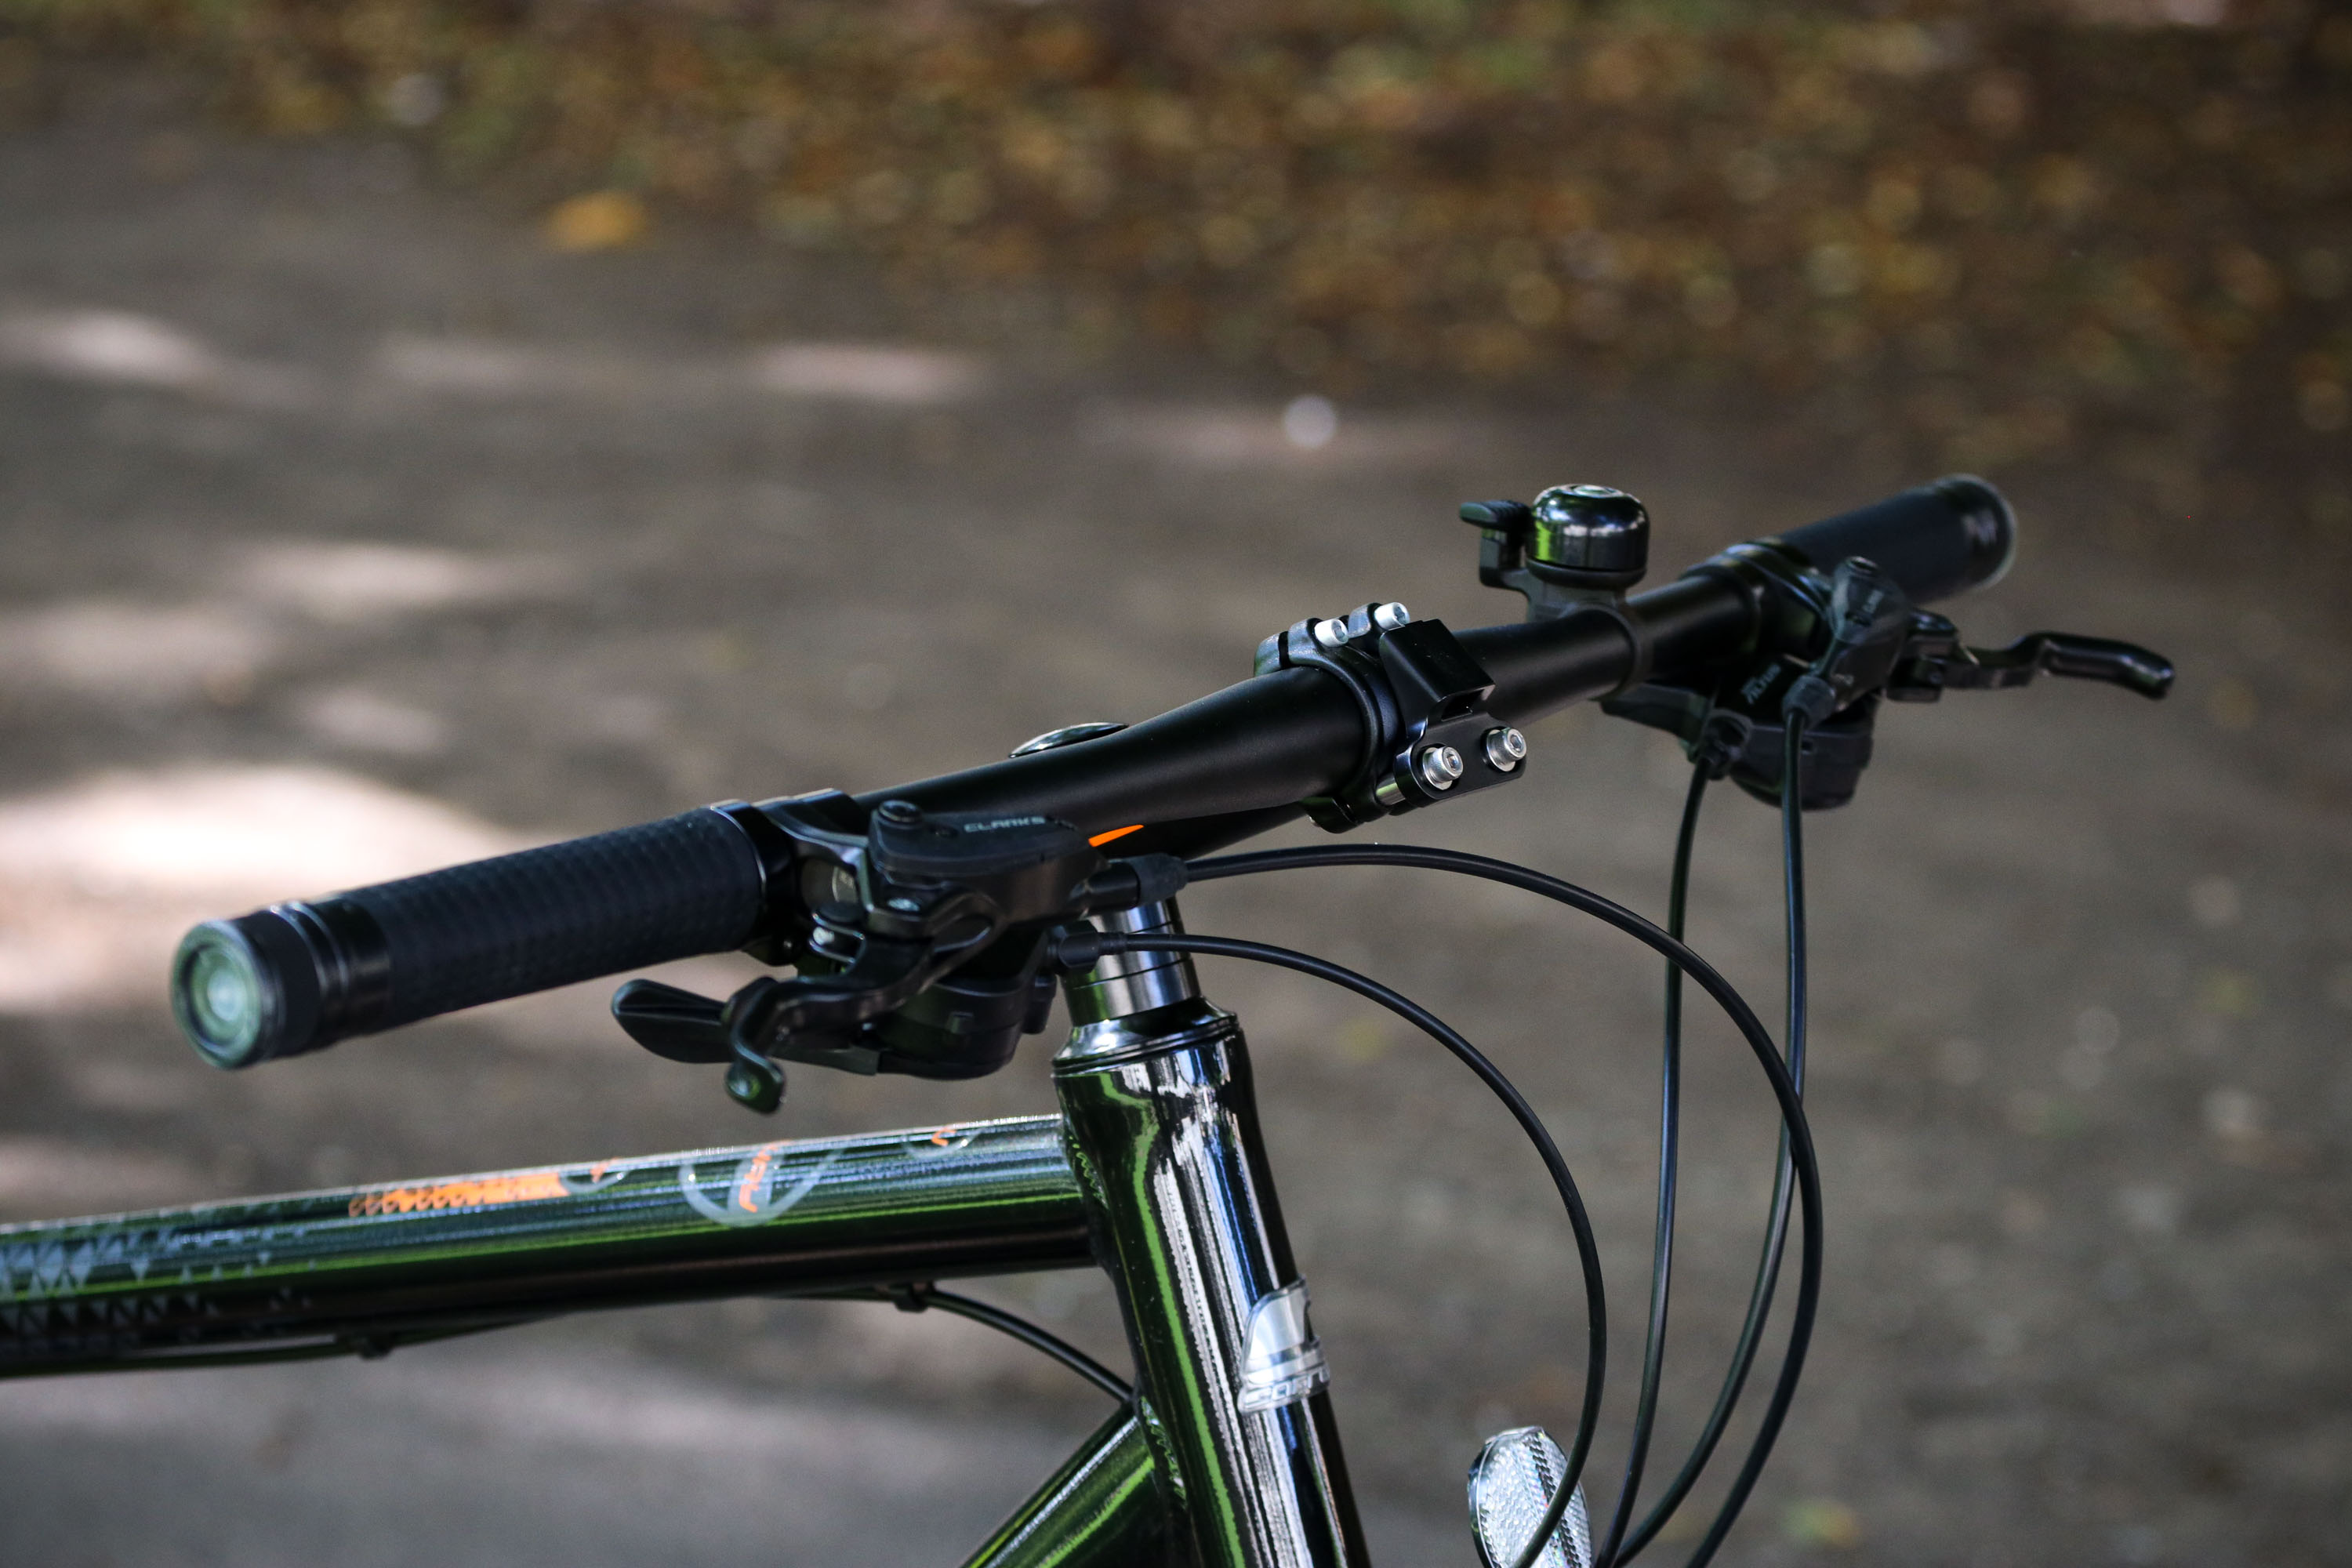 Review: Carrera Subway All Weather Edition Men's Hybrid Bike 